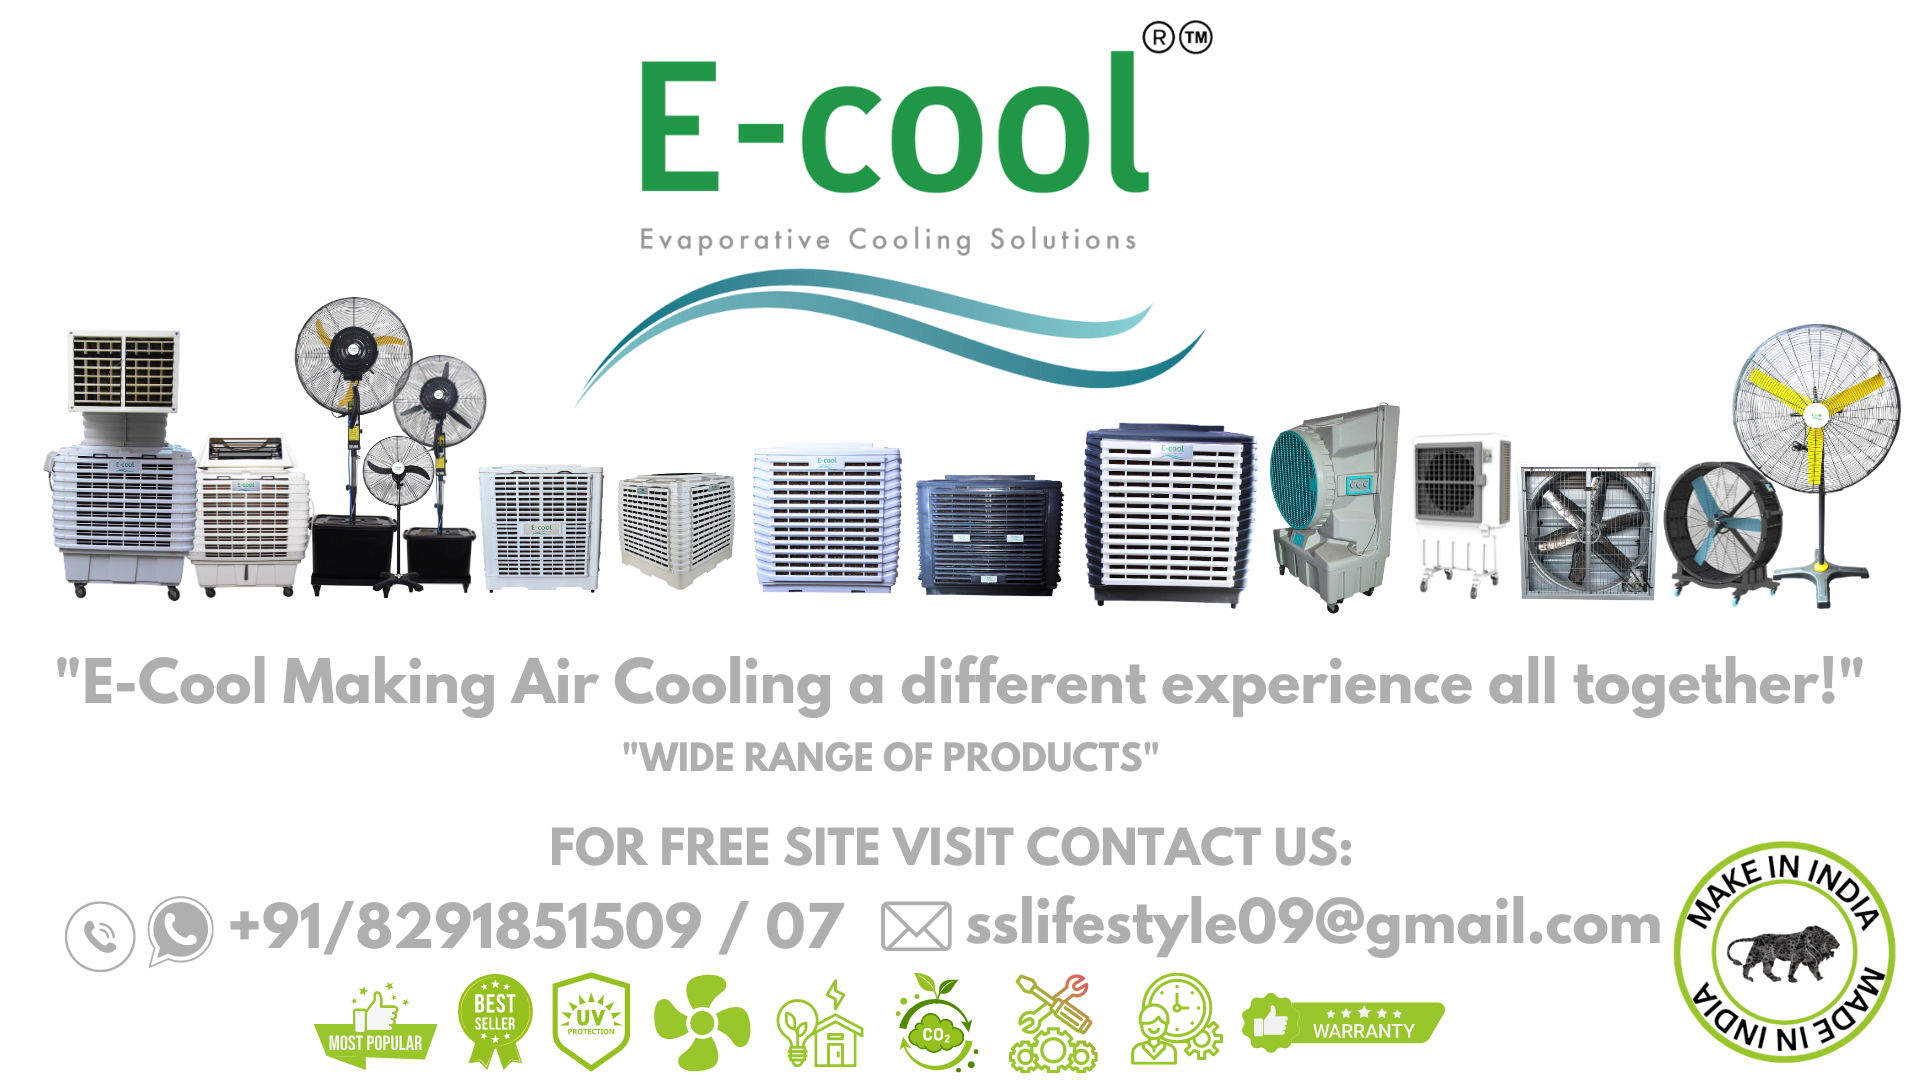 All Products Manufactured by E-Cool